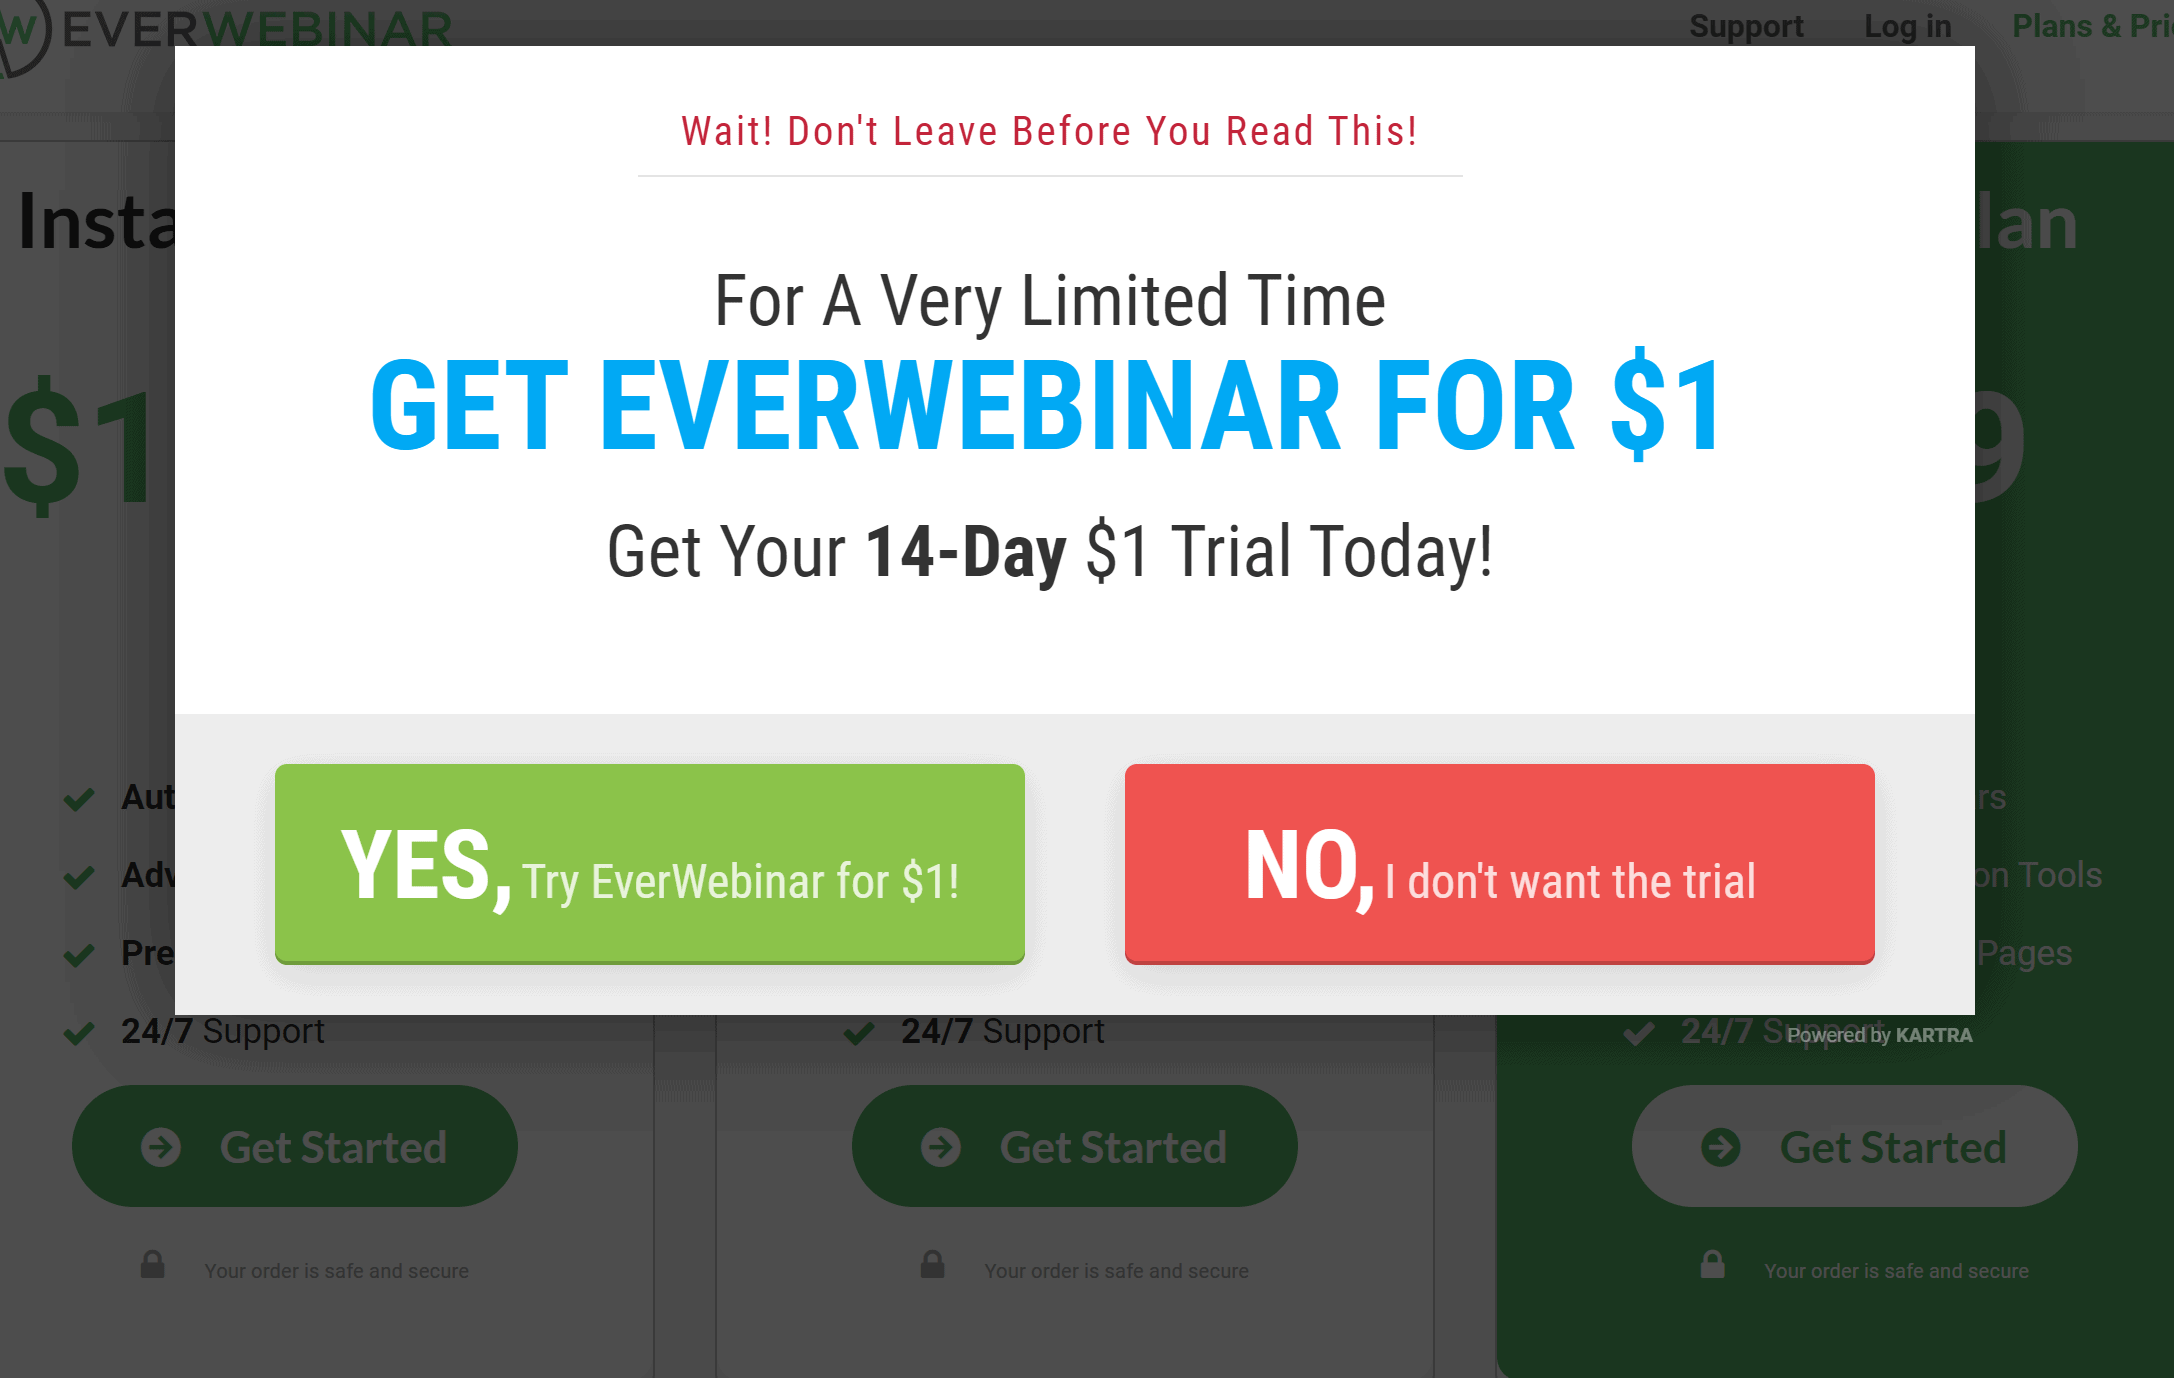 Get Your 14-Day $1 Trial Today!